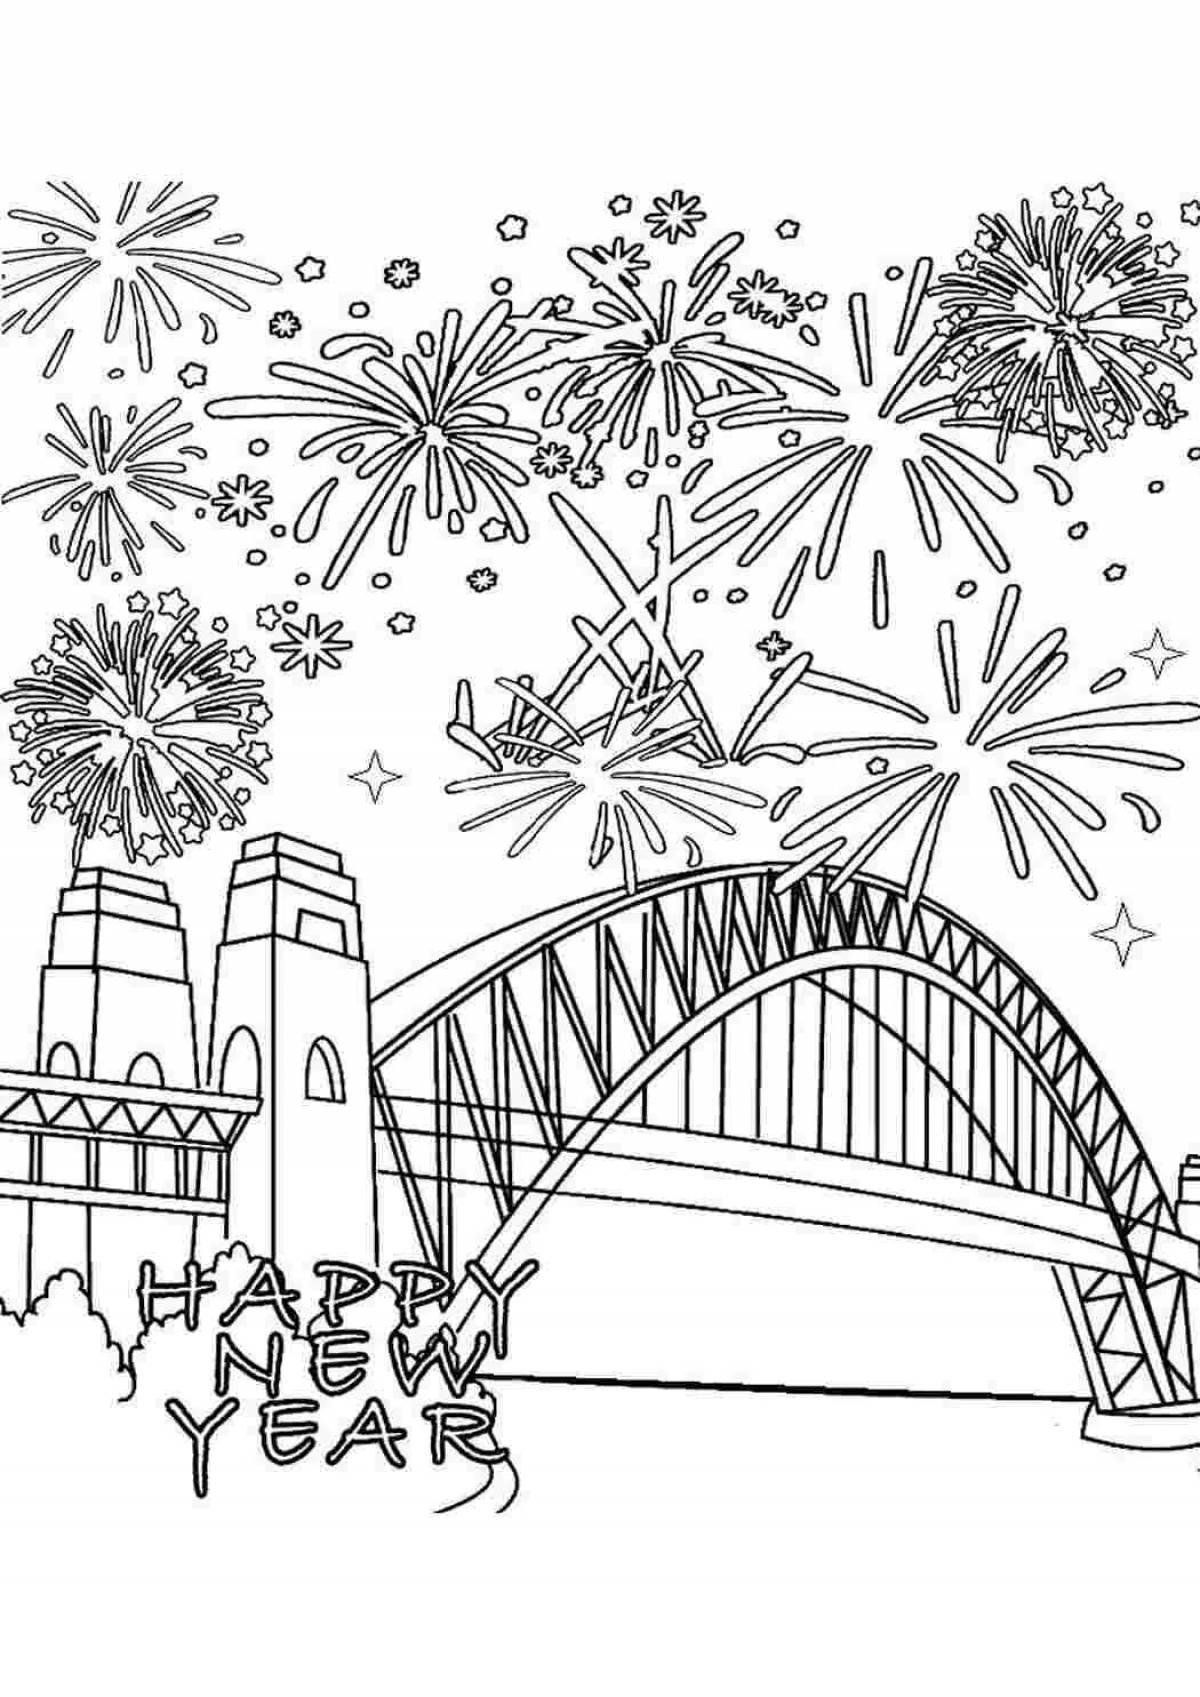 Color-inspiring fireworks coloring page for 3-4 year olds